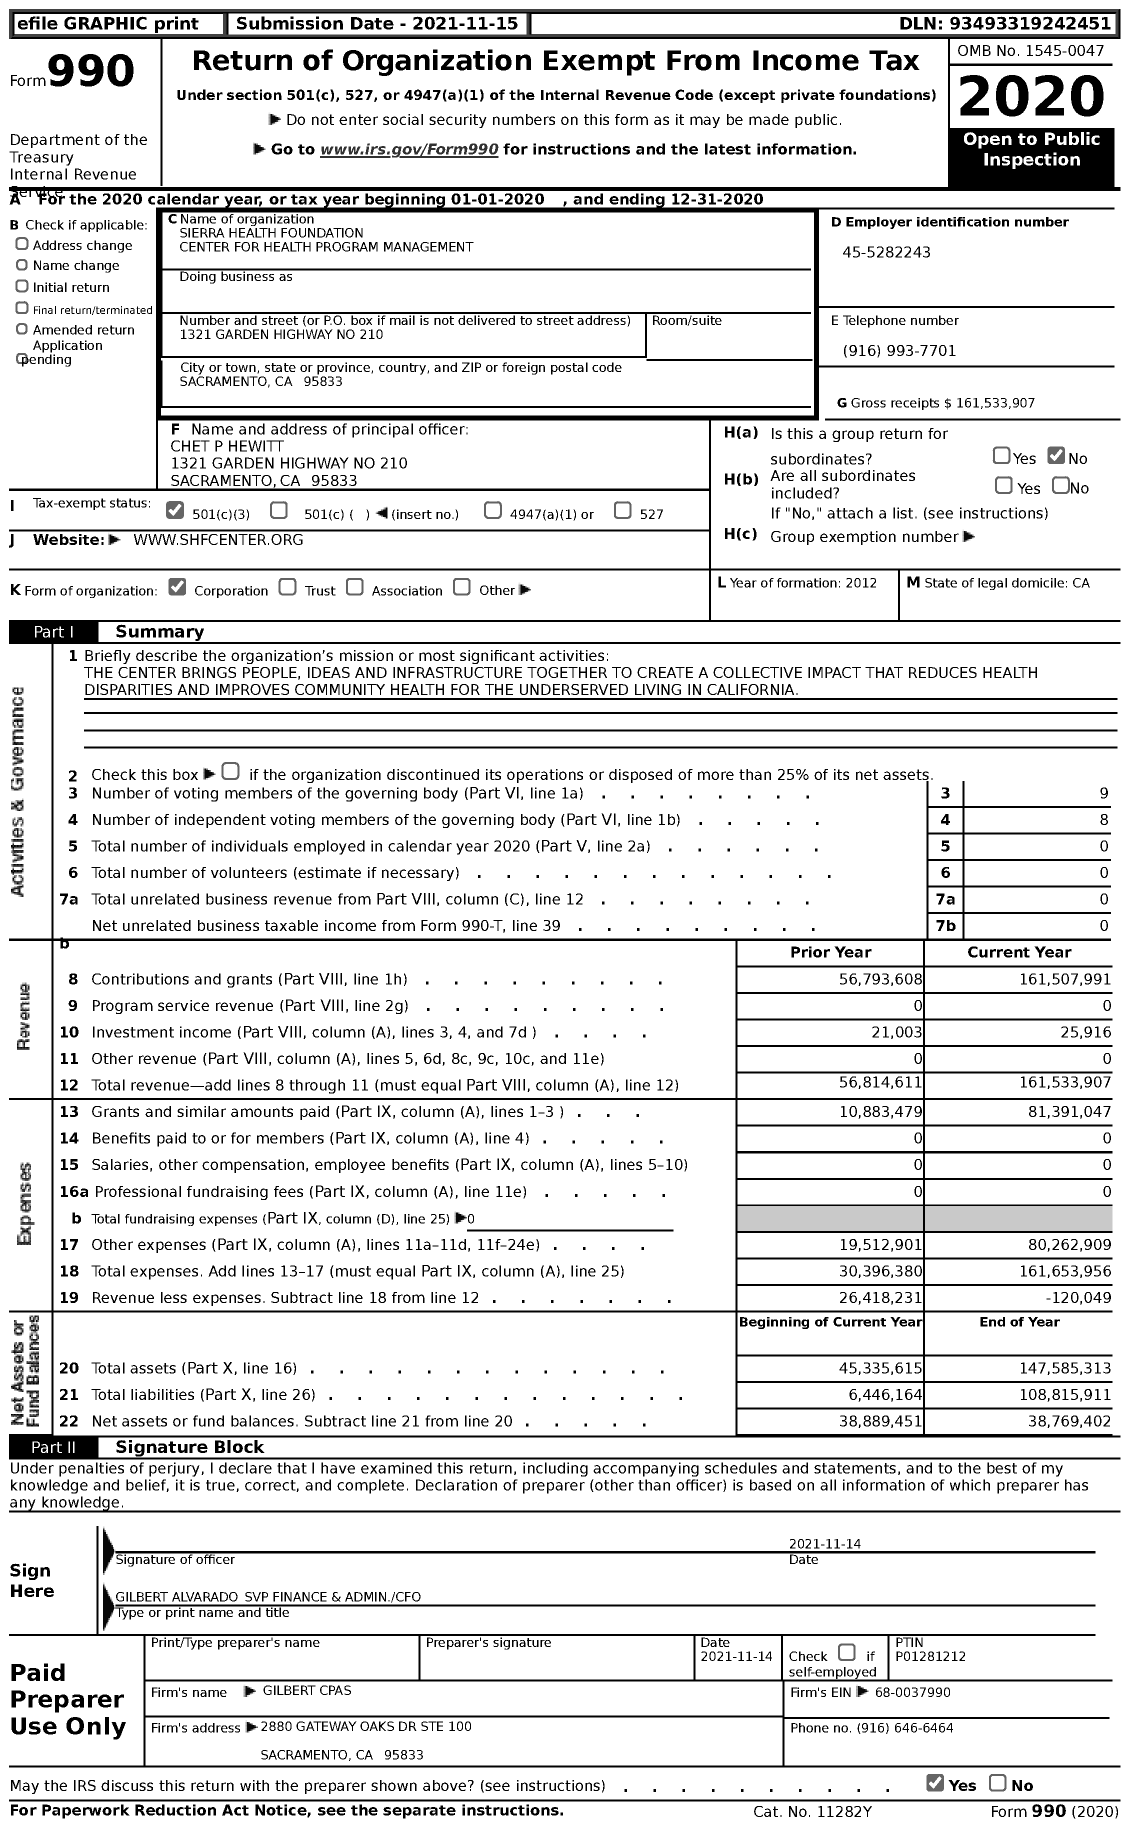 Image of first page of 2020 Form 990 for Sierra Health Foundation Center for Health Program Management